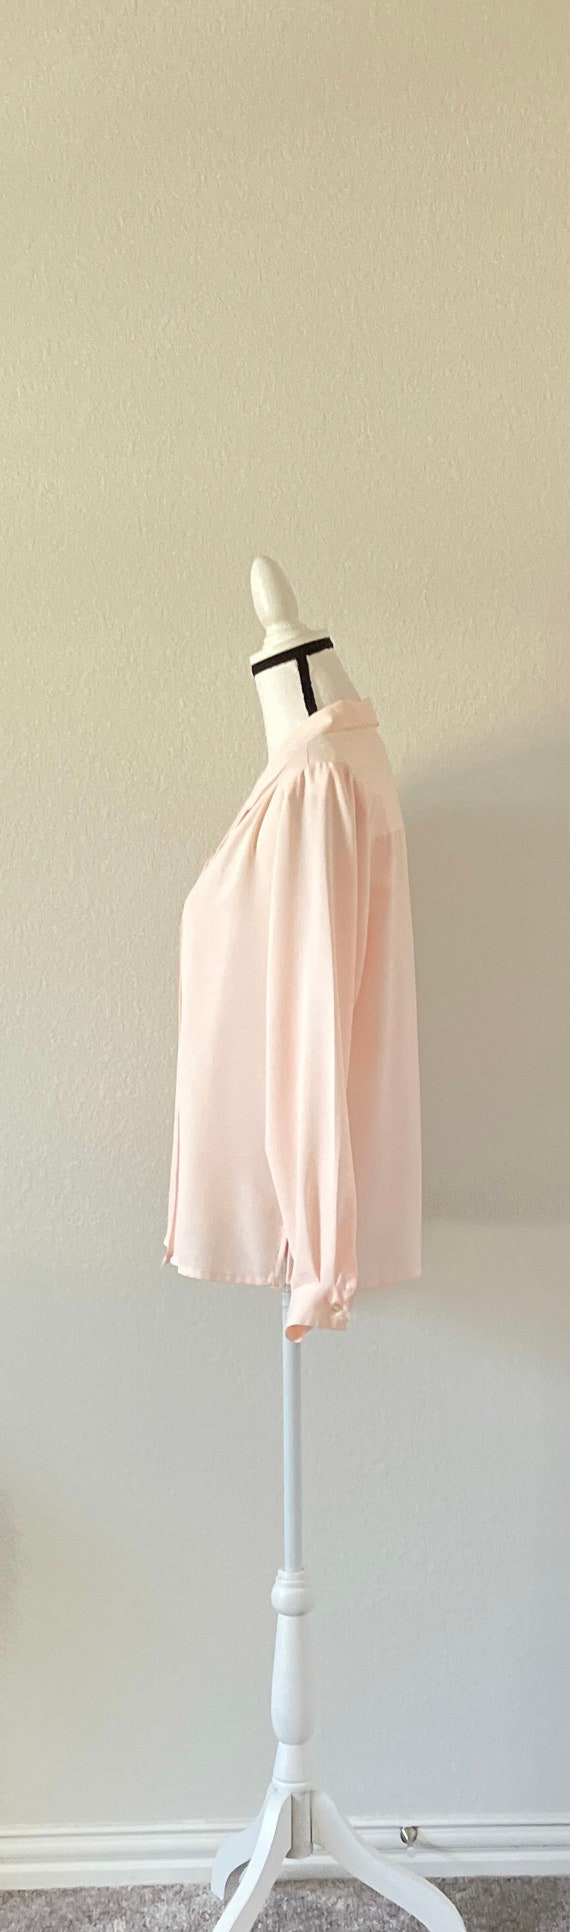 1980s Peach Blouse, 1980s Pintuck Pink Top - image 4